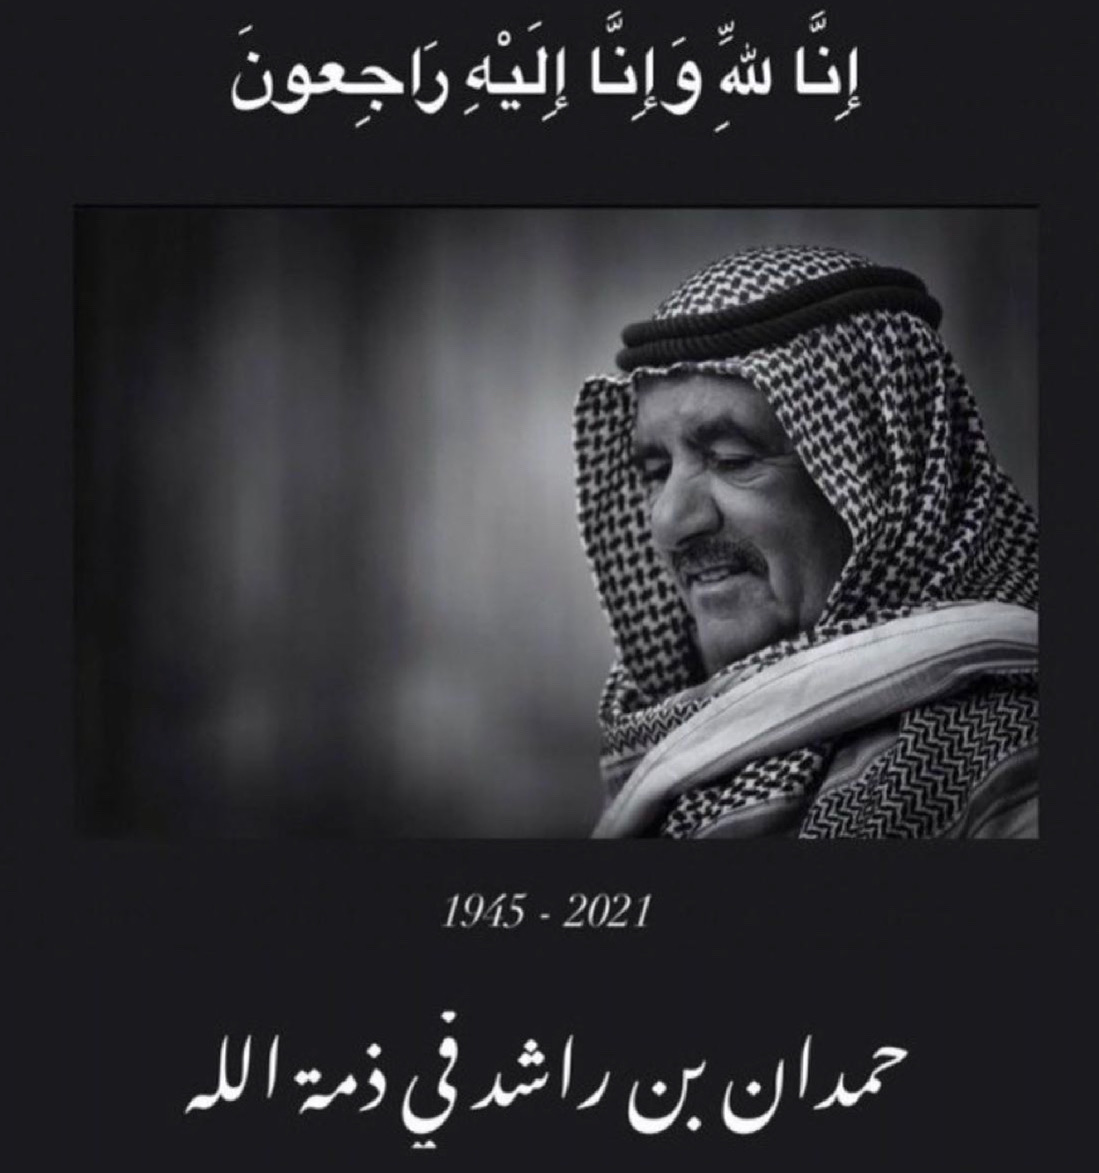 sincere condolences to the UAE and its leaders